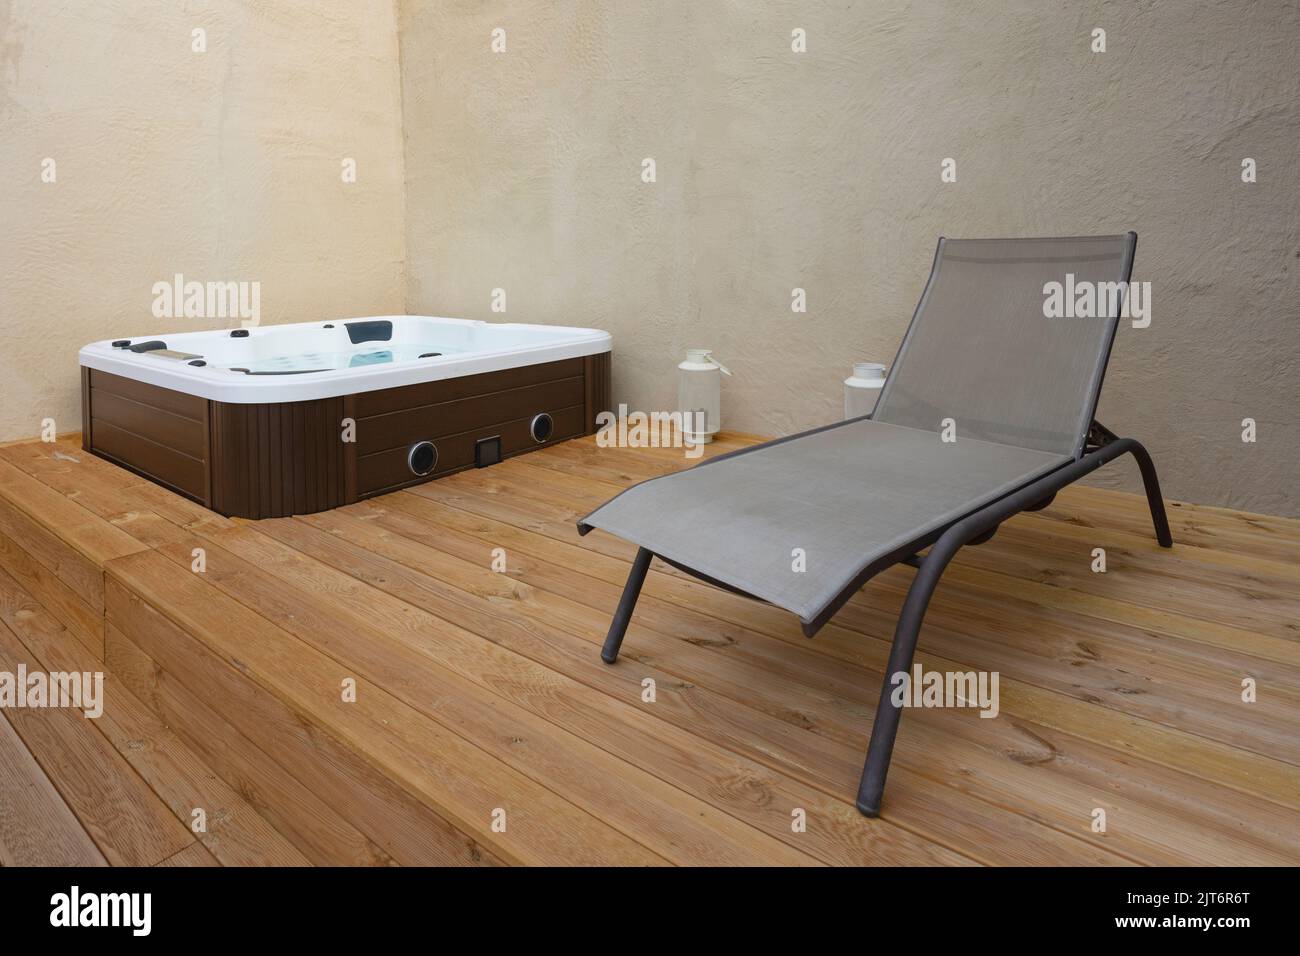 Jacuzzi and deck chair on wooden floor in a house. Stock Photo